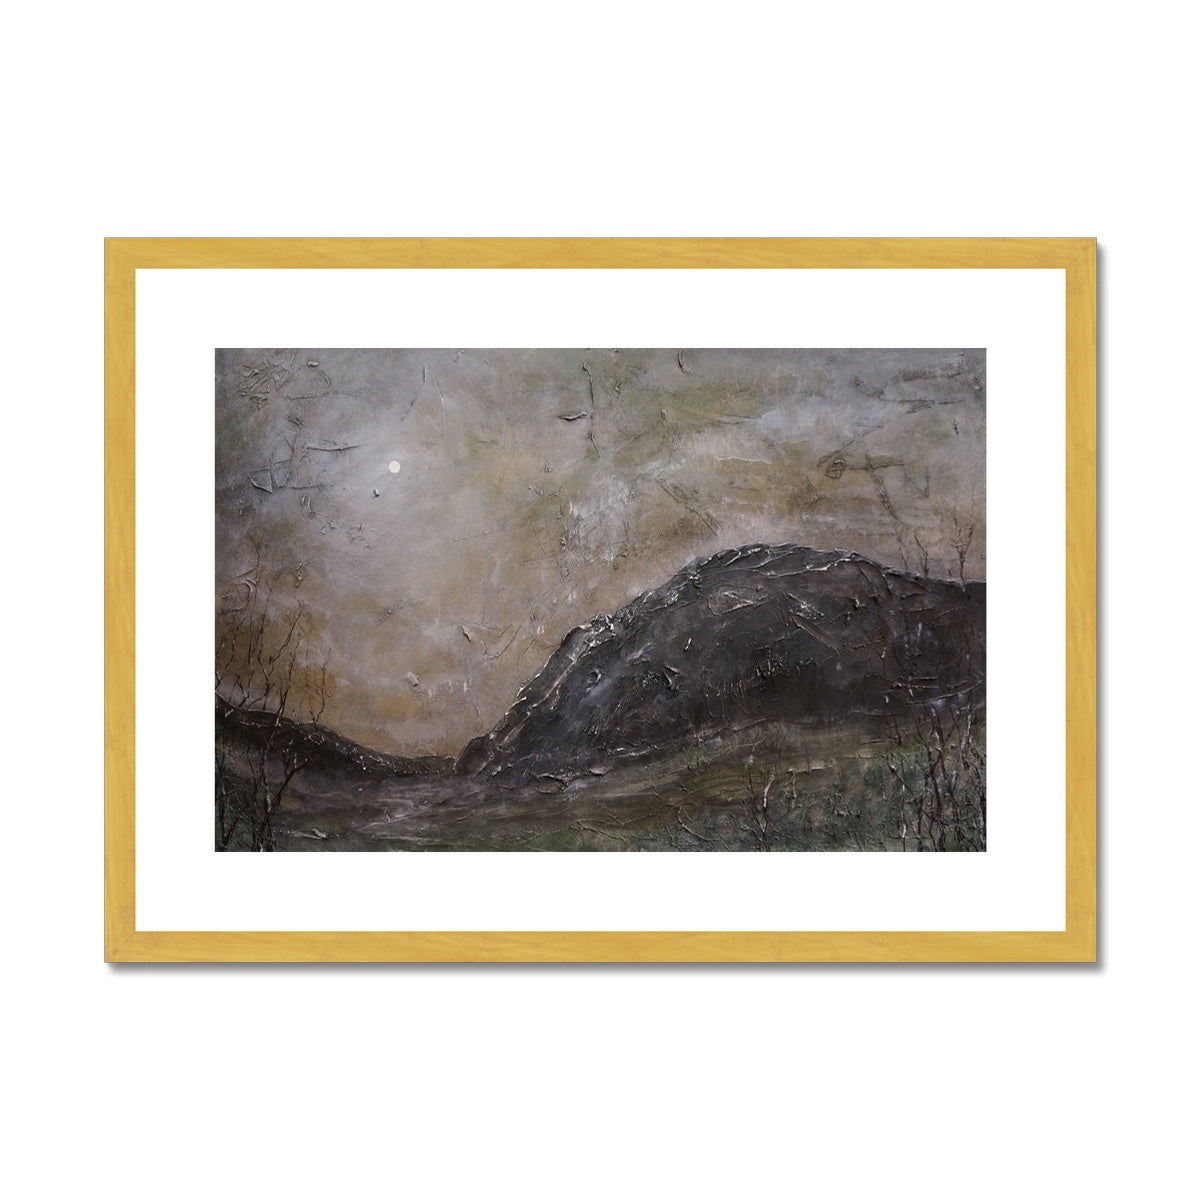 Glen Nevis Moonlight Painting | Antique Framed & Mounted Prints From Scotland-Fine art-Scottish Lochs & Mountains Art Gallery-A2 Landscape-Gold Frame-Paintings, Prints, Homeware, Art Gifts From Scotland By Scottish Artist Kevin Hunter